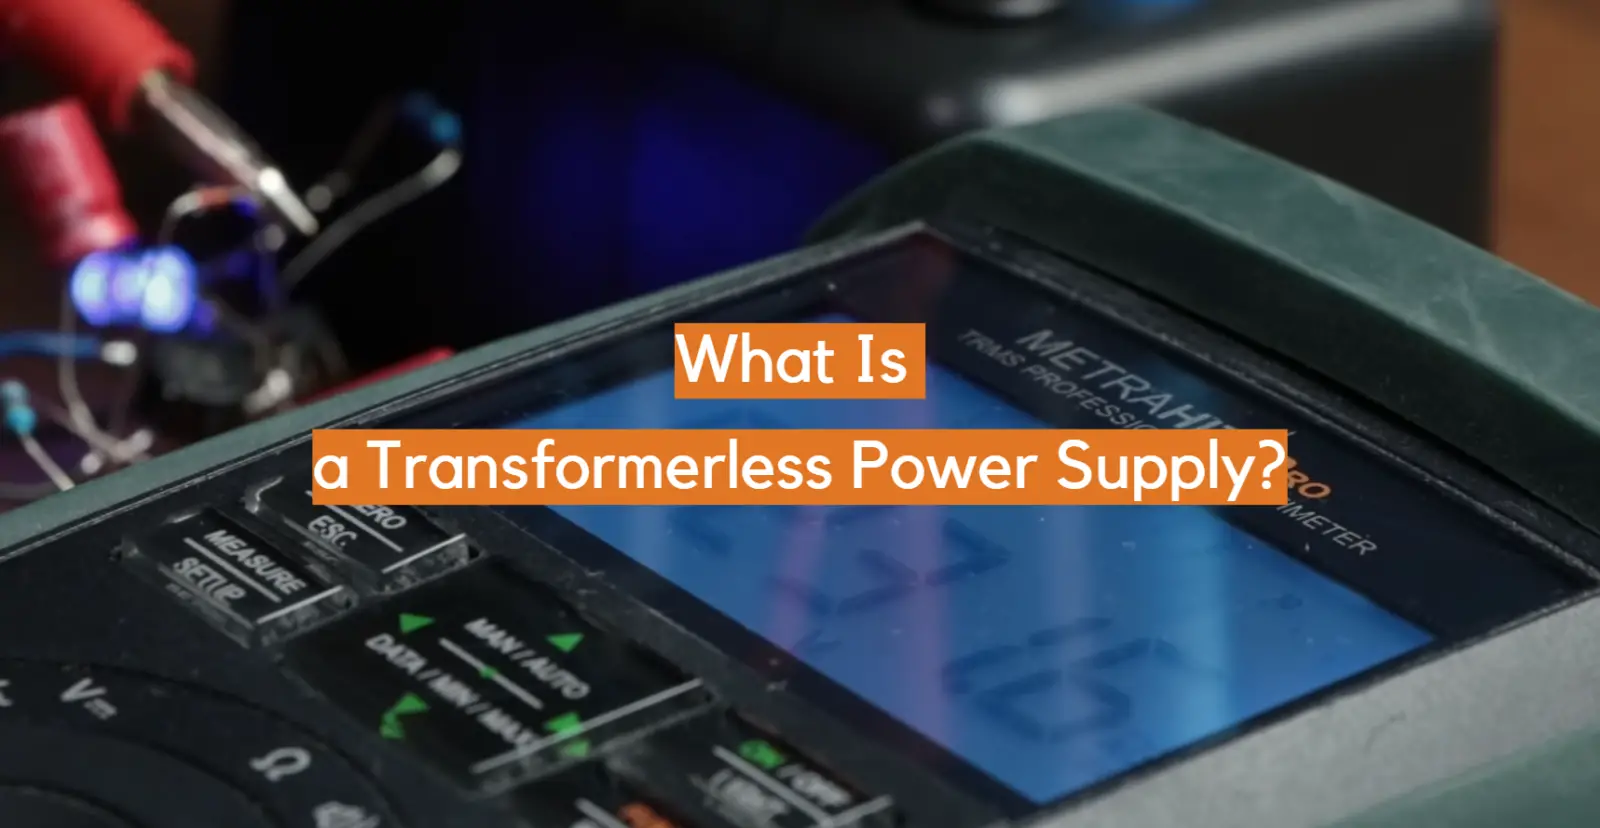 What Is a Transformerless Power Supply?